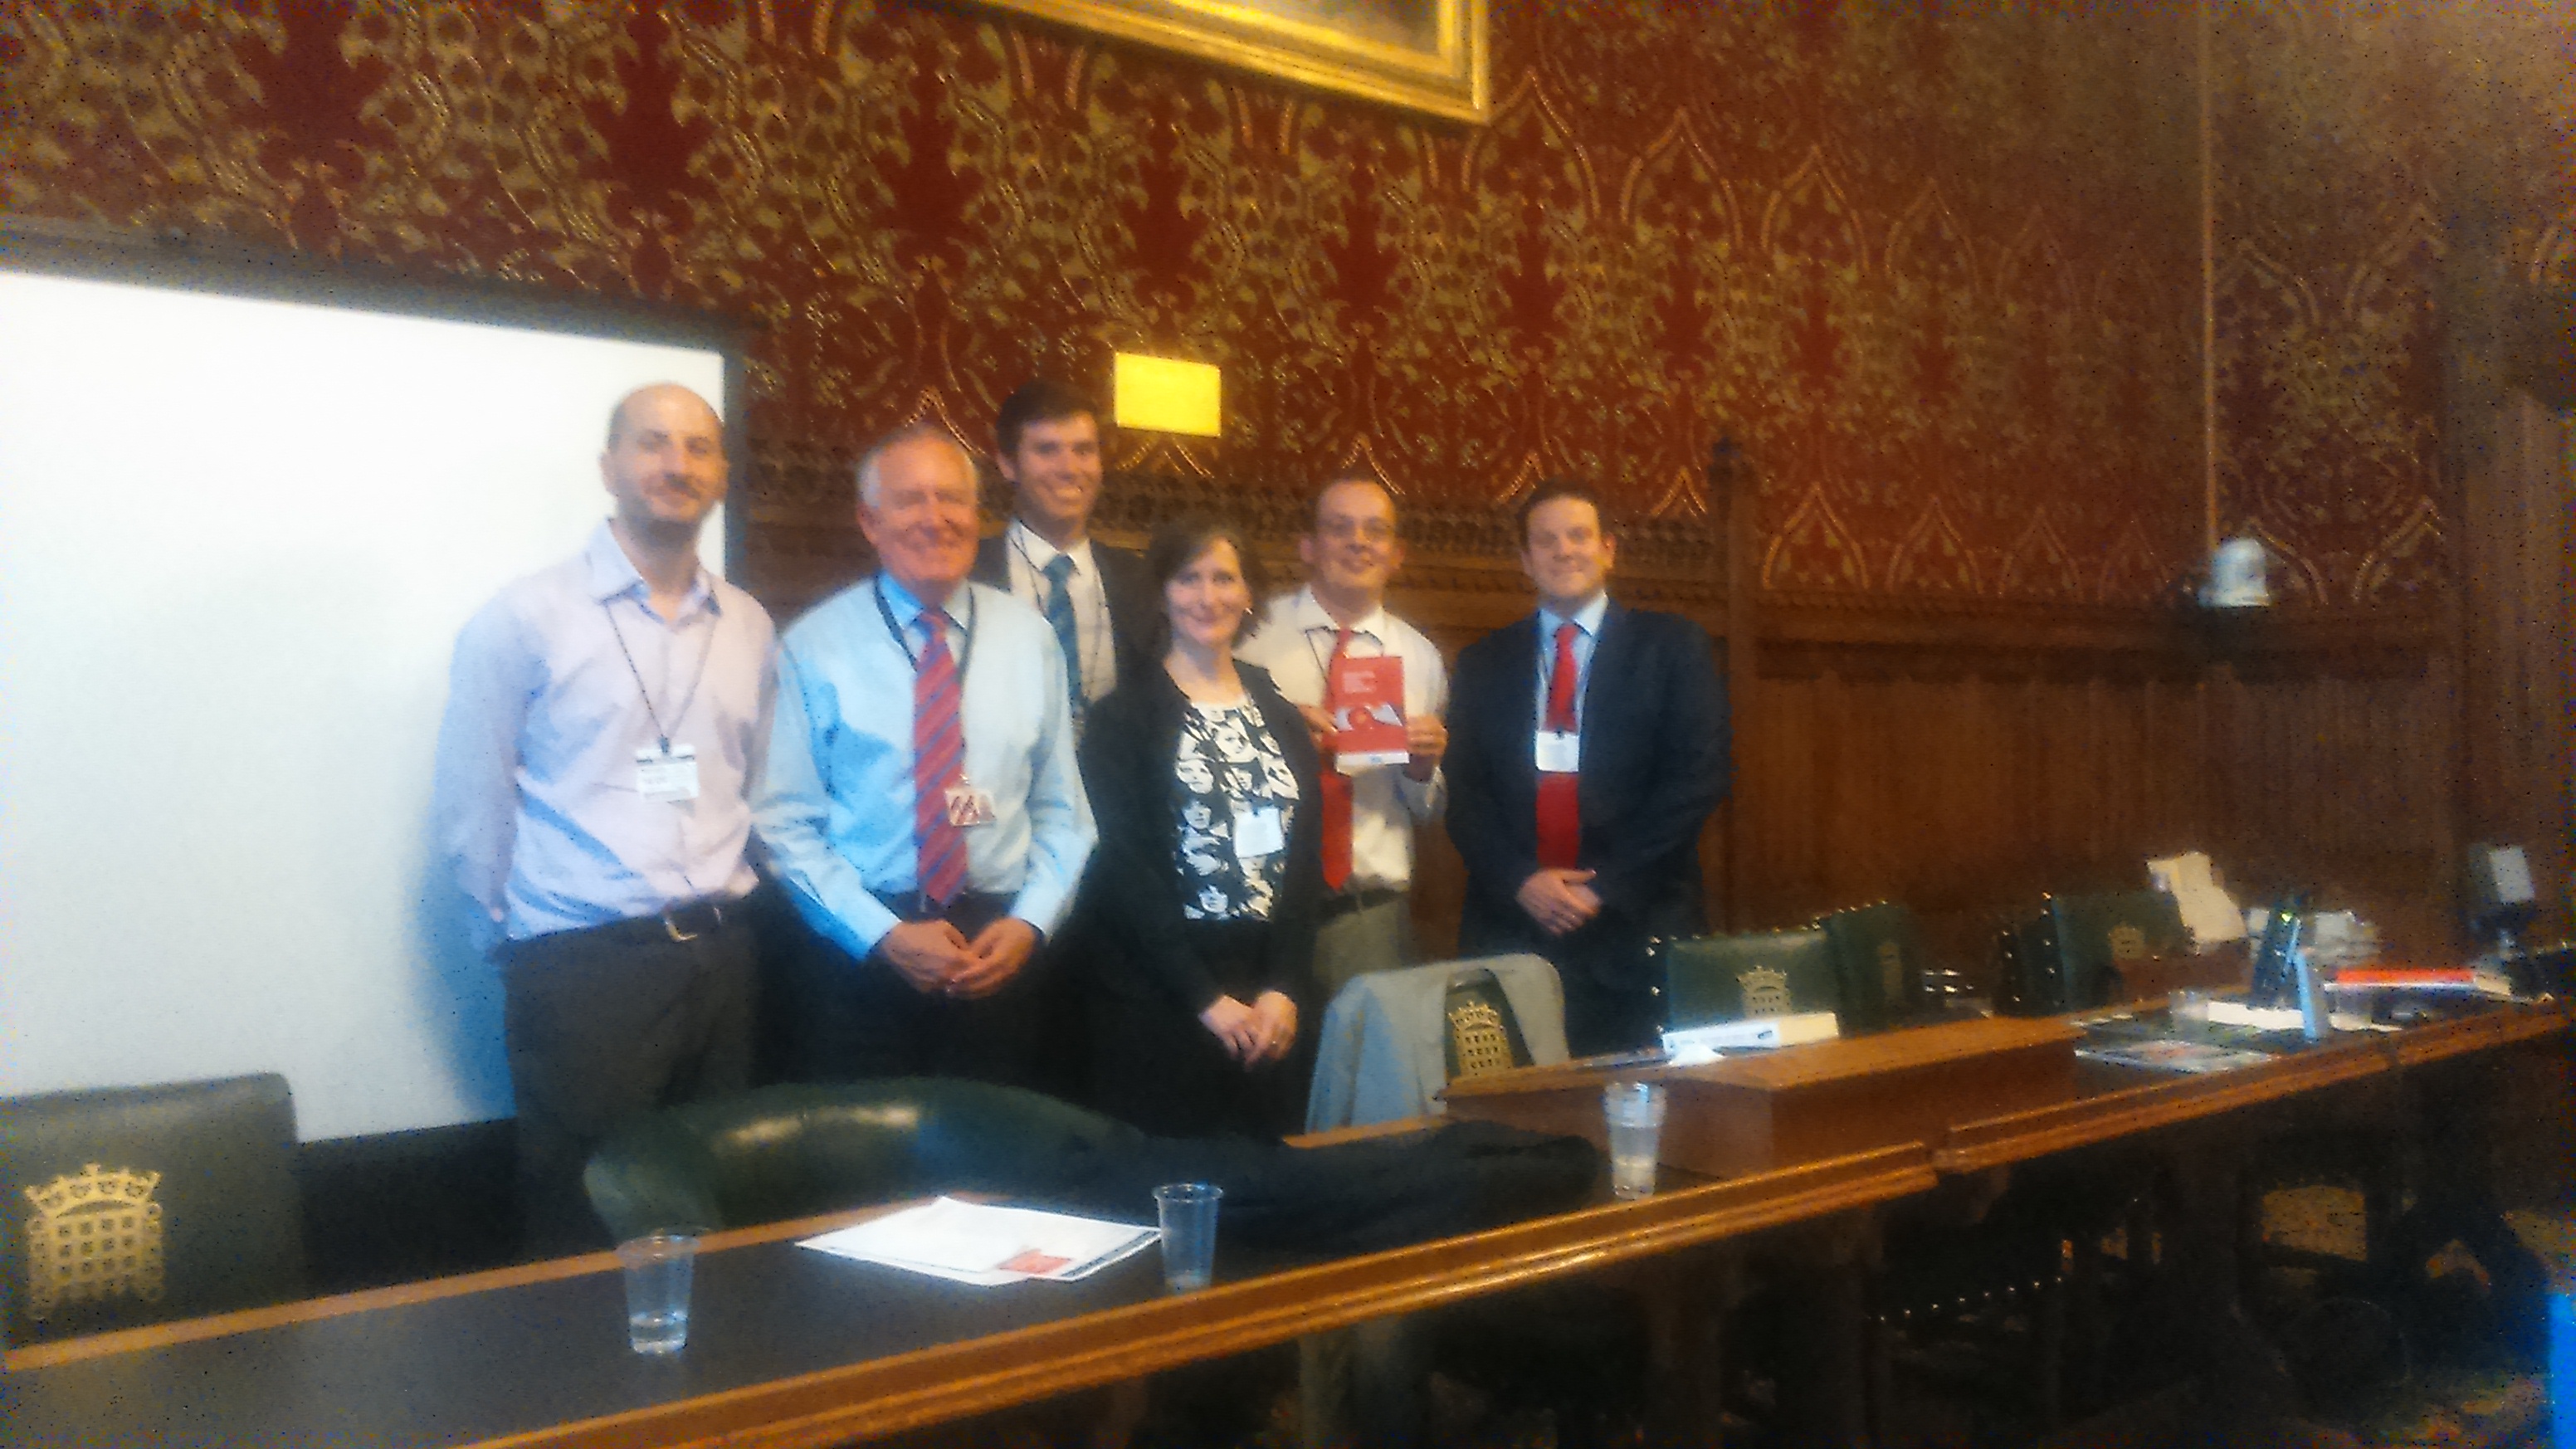 House of Commons launch of Rebuilding social democracy